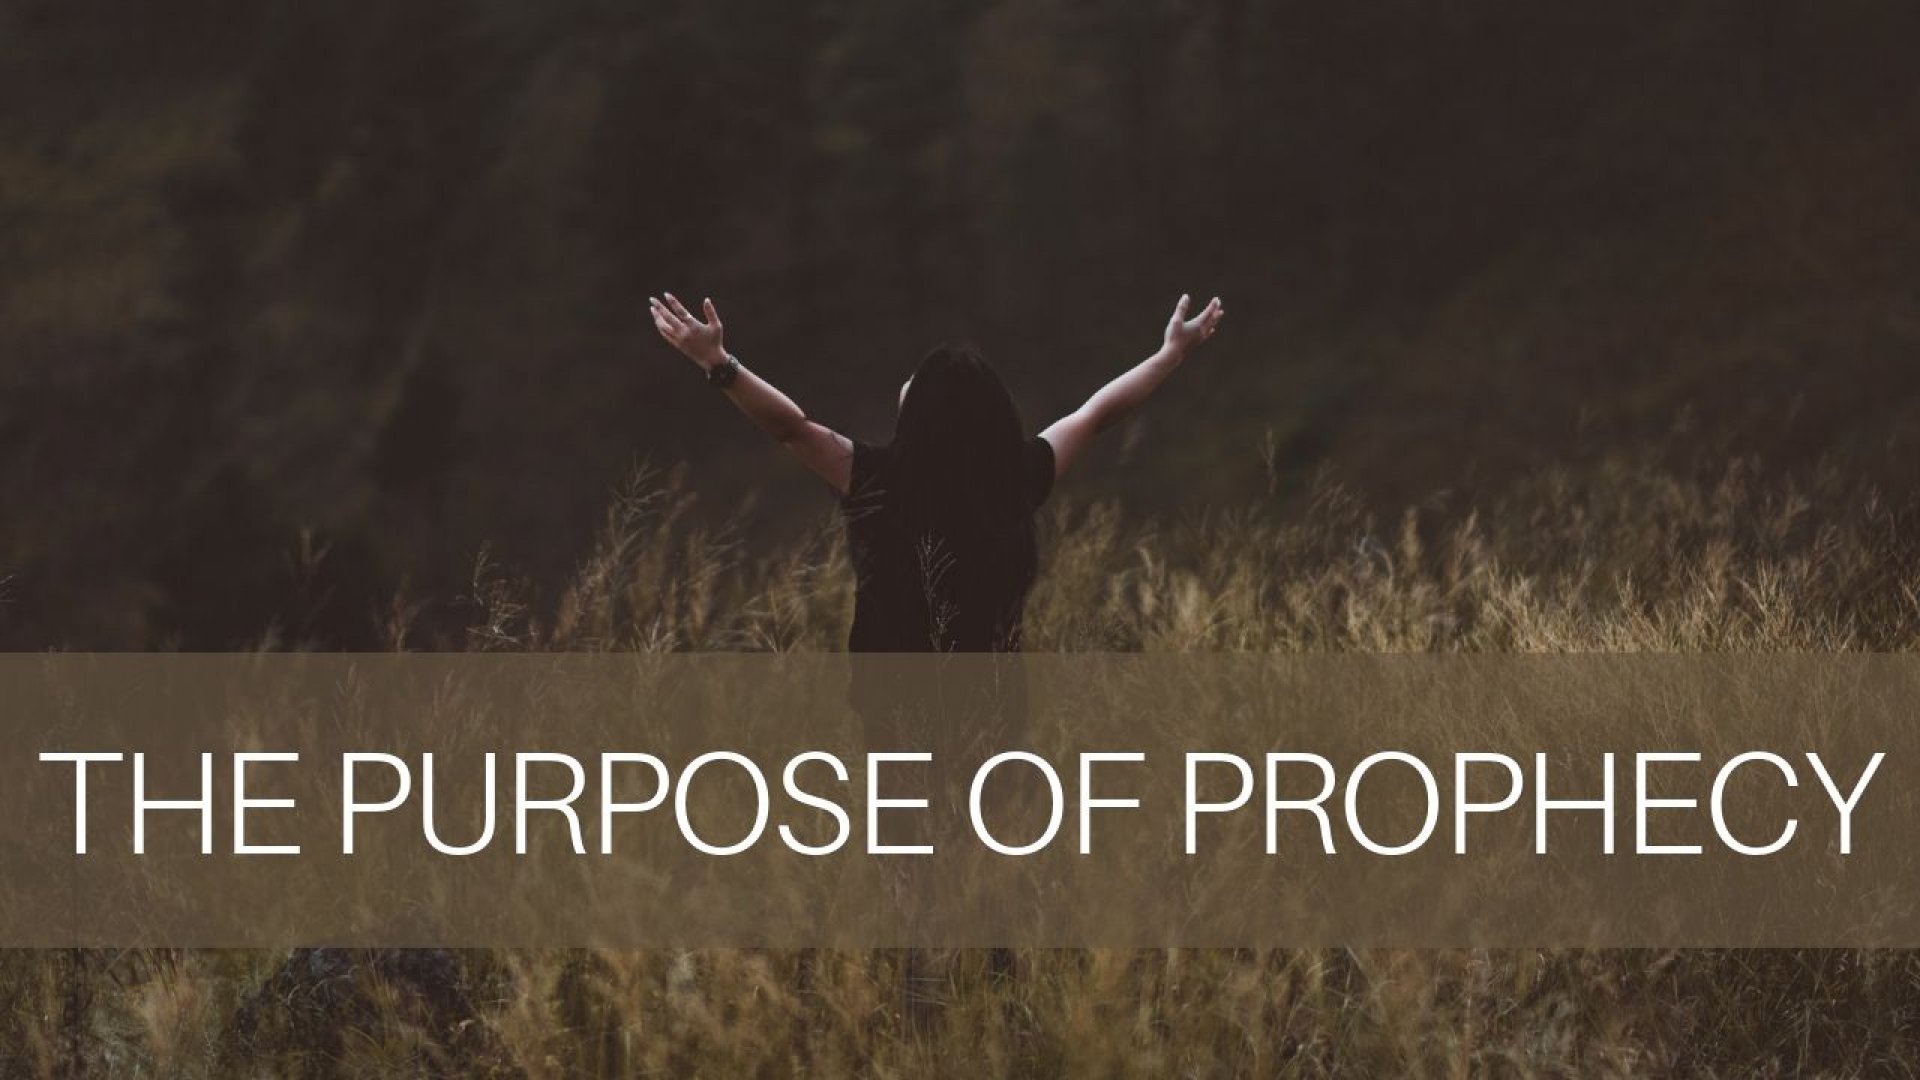 THE PURPOSE OF PROPHECY